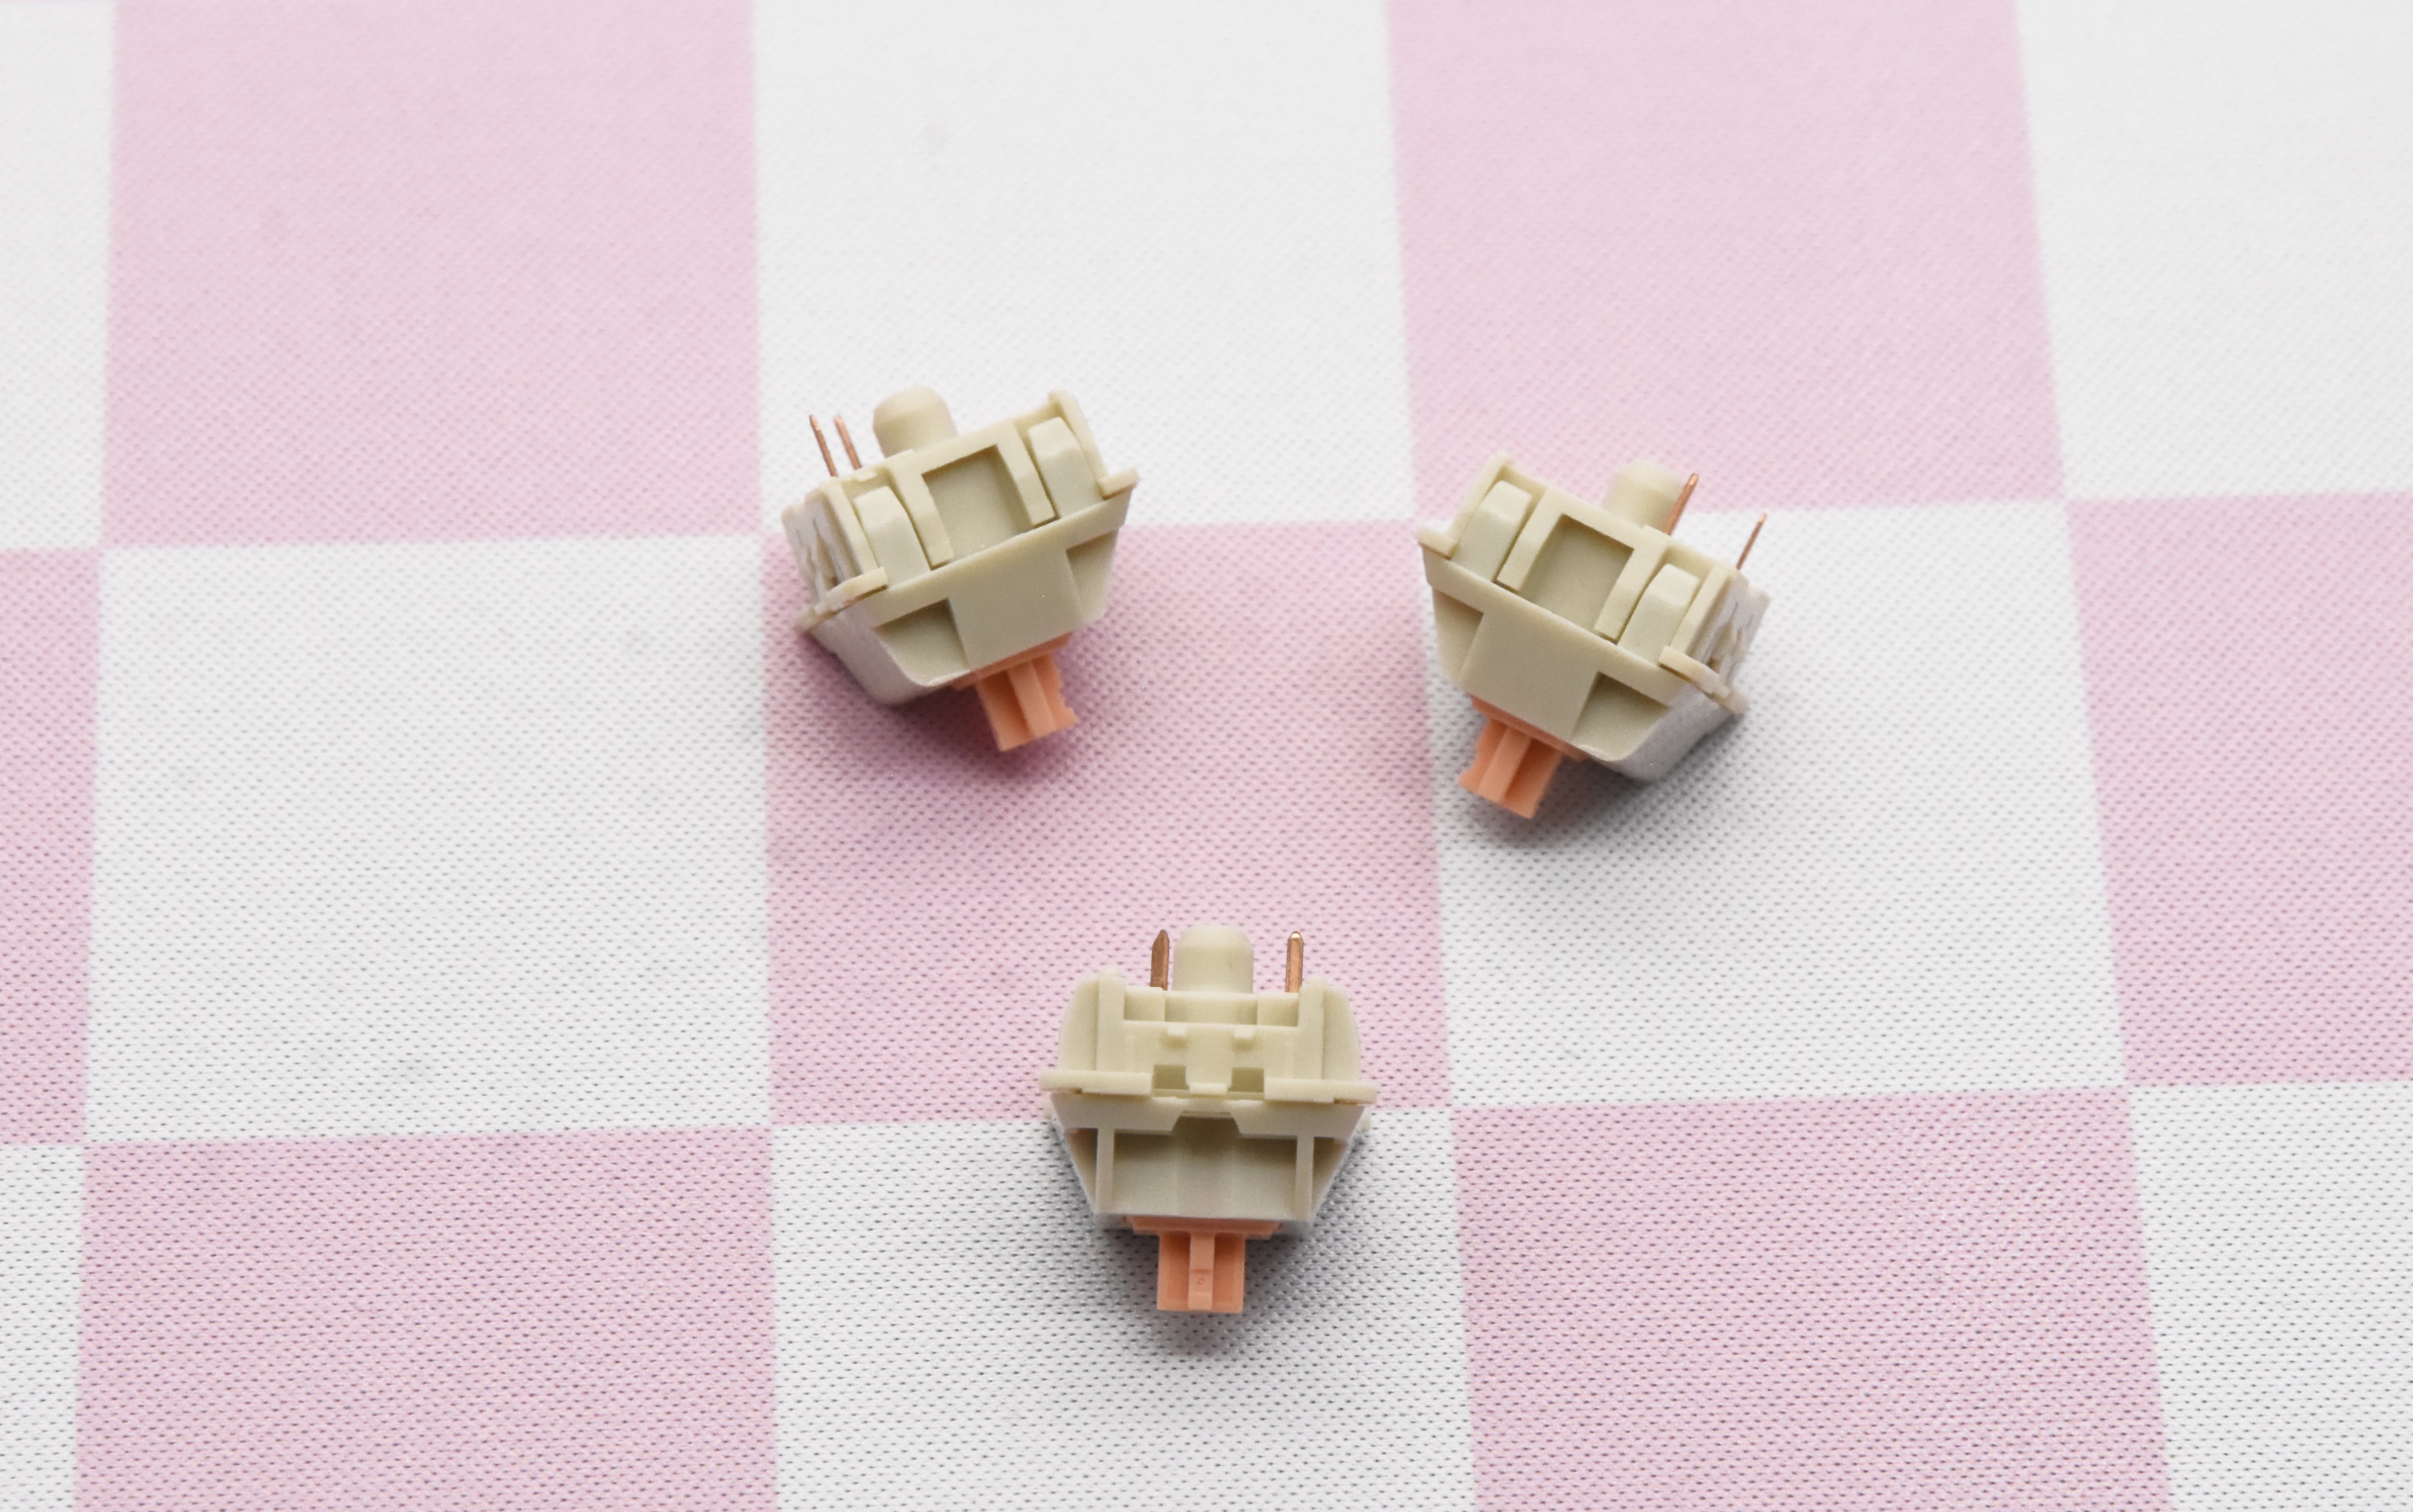 MMD HOLY PANDA V3 TACTILE SWITCH FACTORY LUBED EDITION (10PCS)